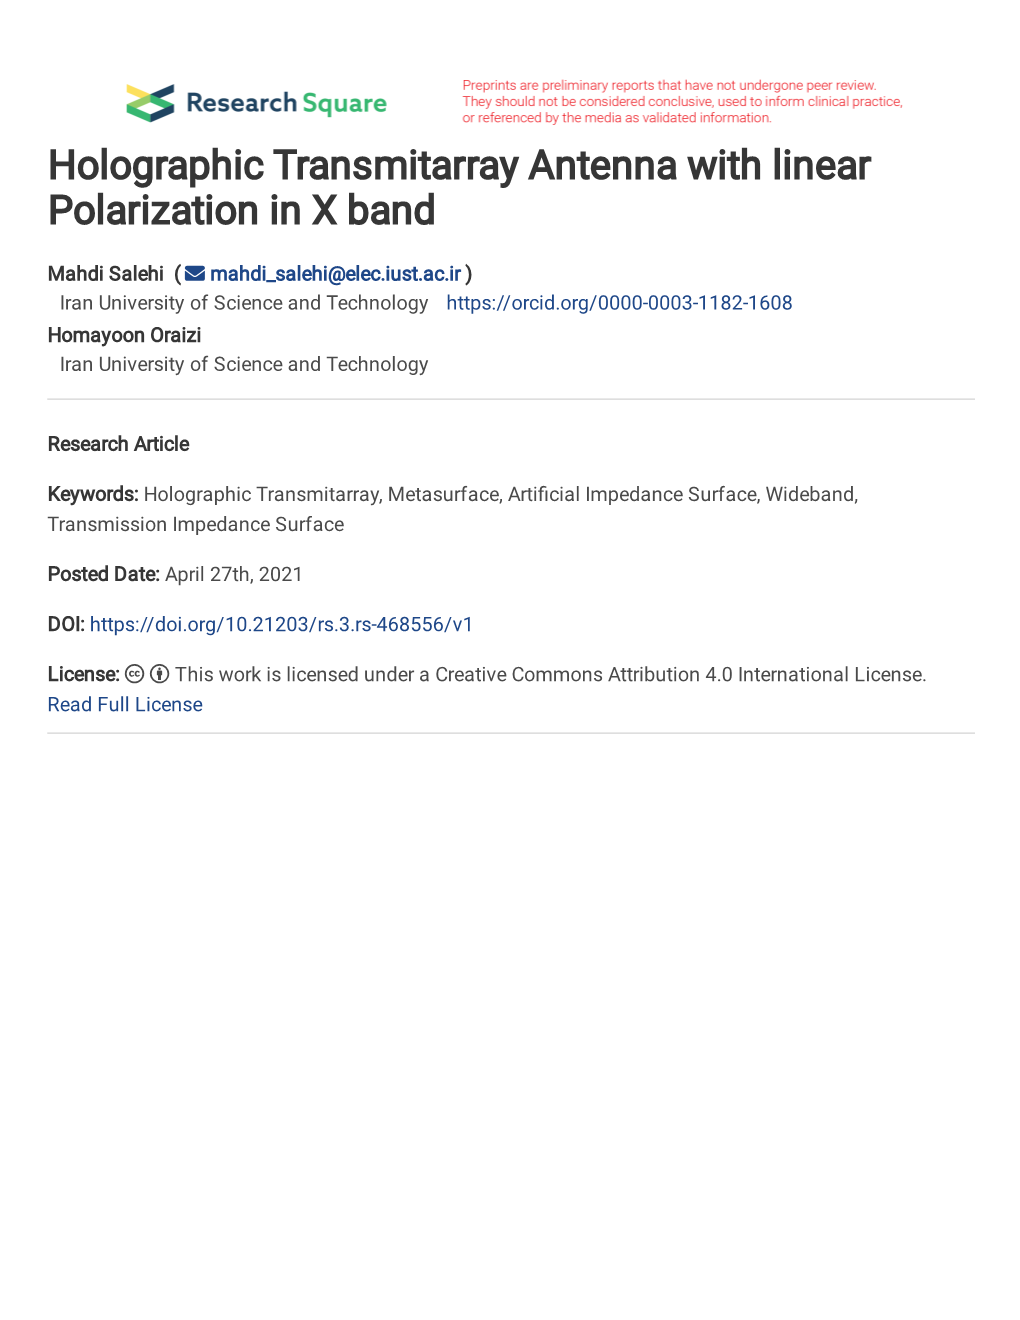 Holographic Transmitarray Antenna with Linear Polarization in X Band